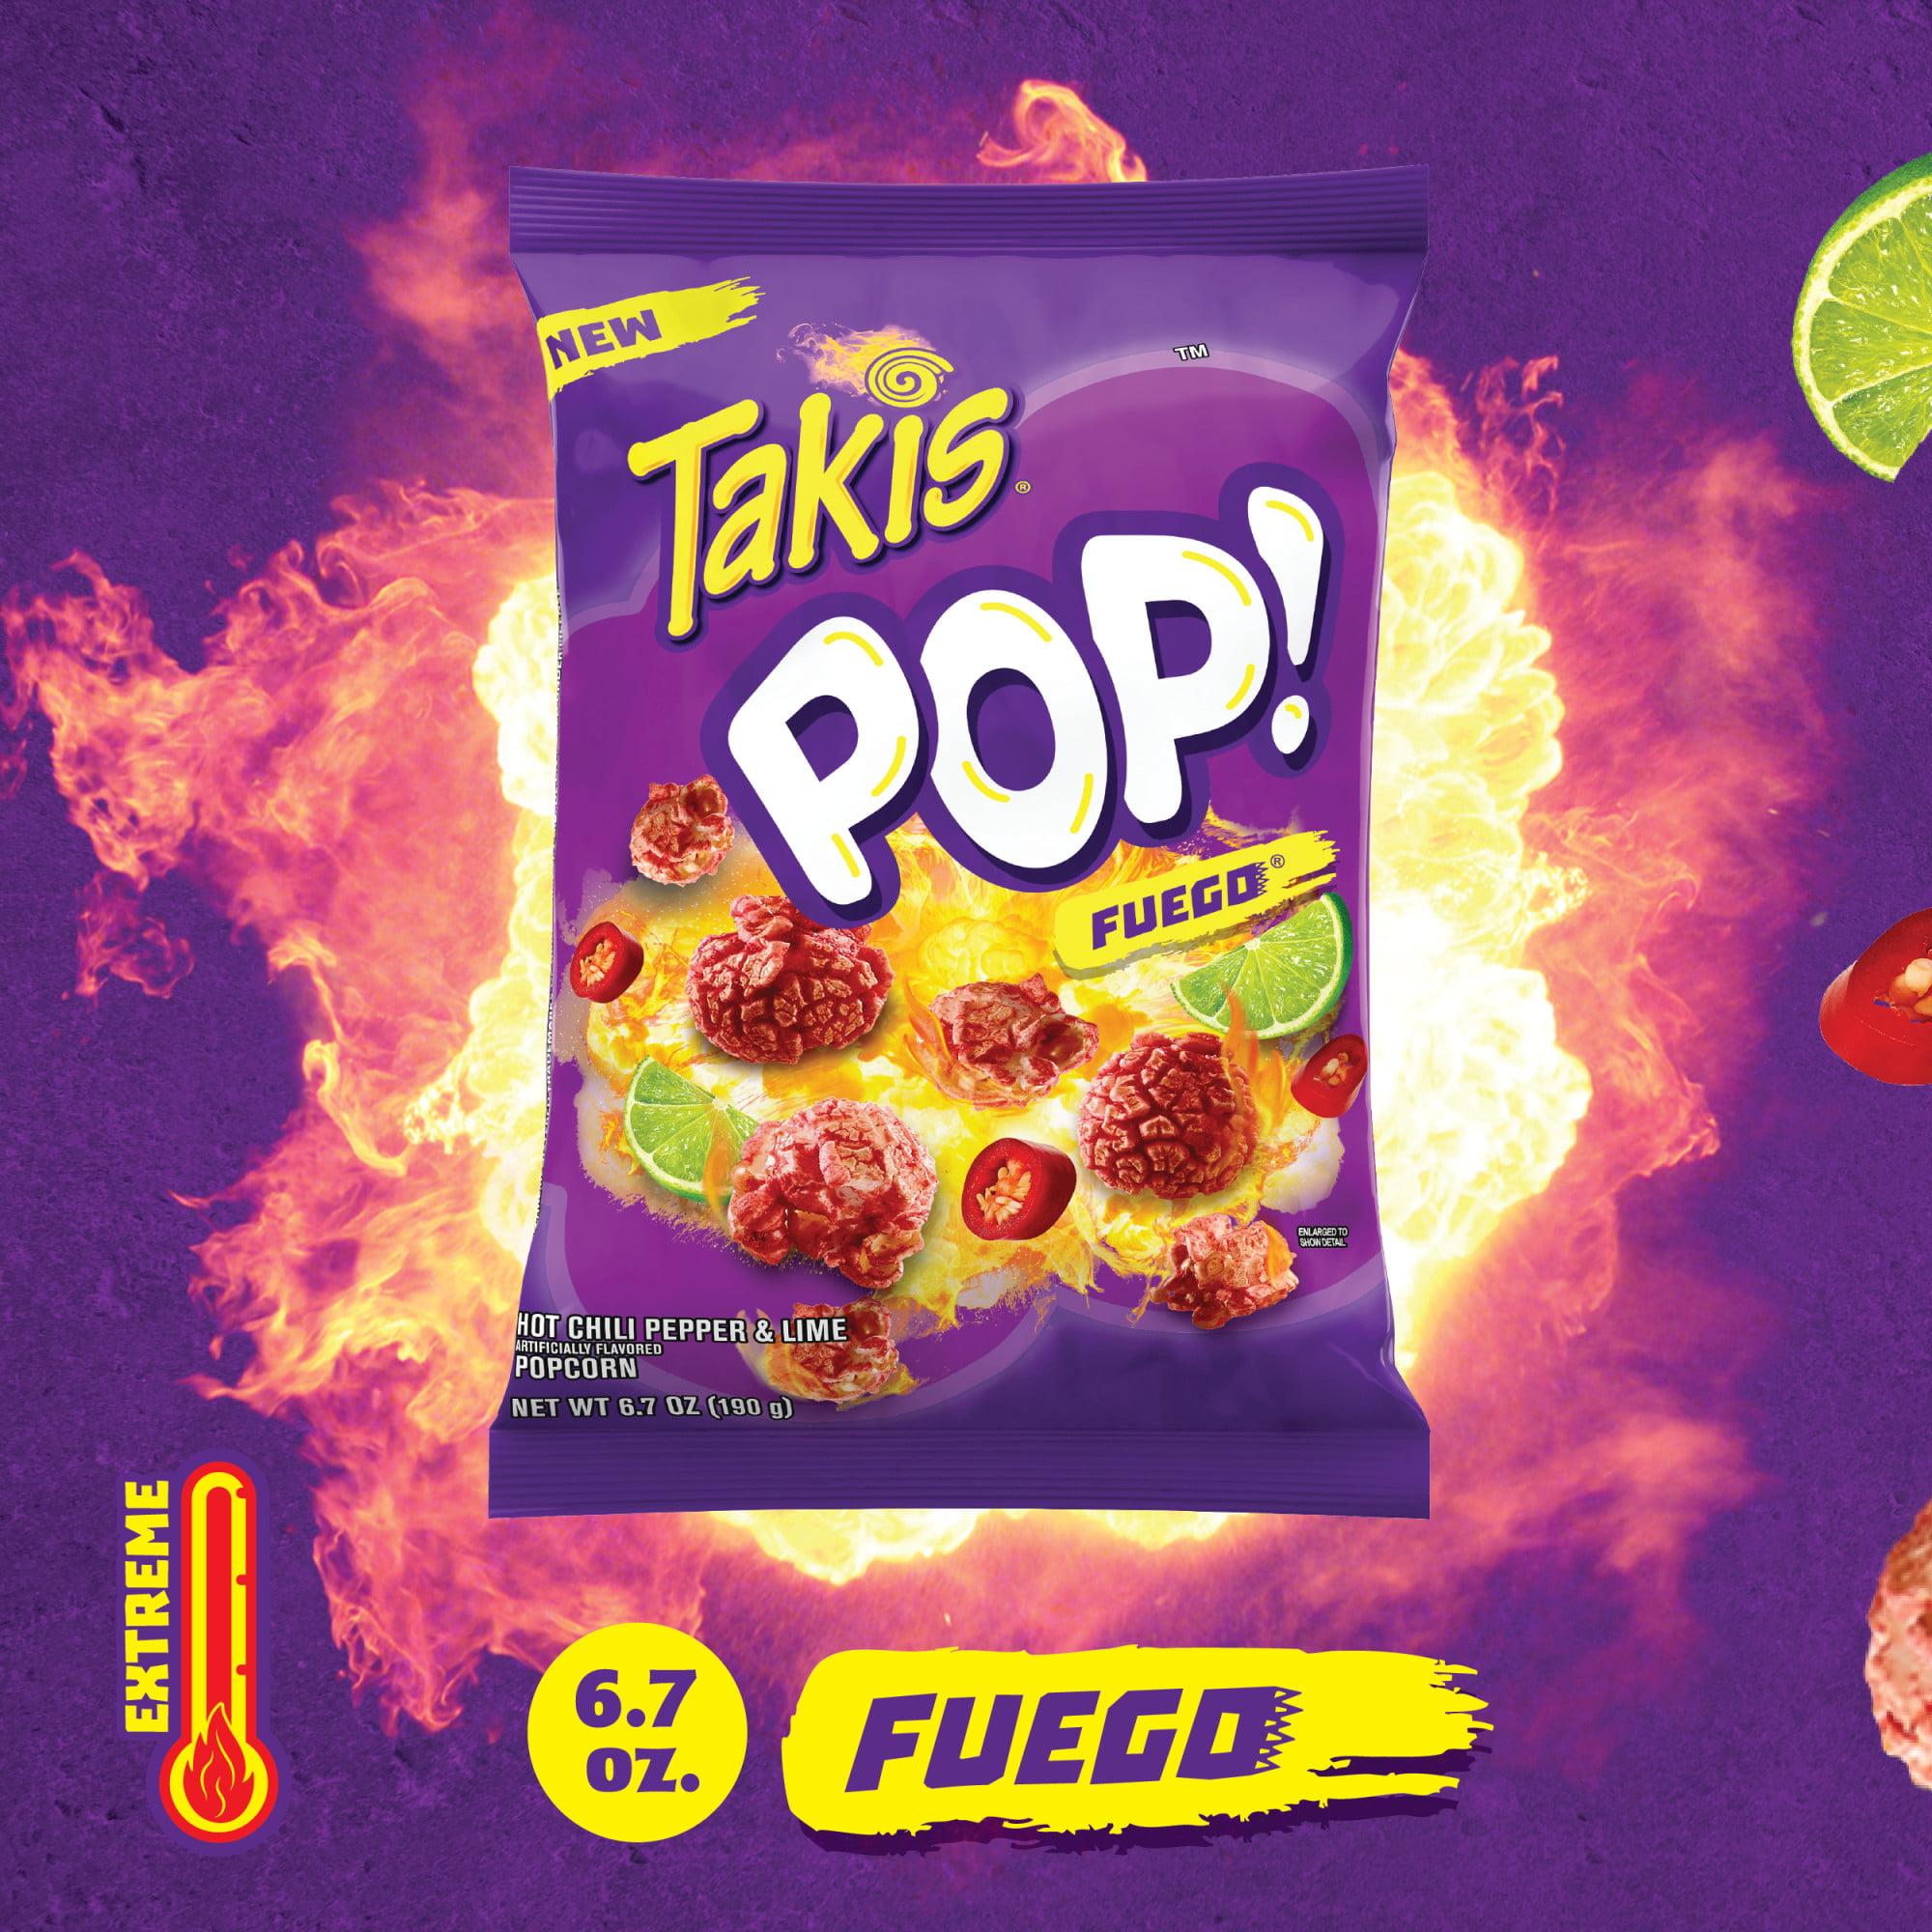 Takis Pop! Fuego Ready-To-Eat Popcorn, Hot Chili Pepper and Lime Artificially Flavored Popcorn,  6.7 Ounce Bag